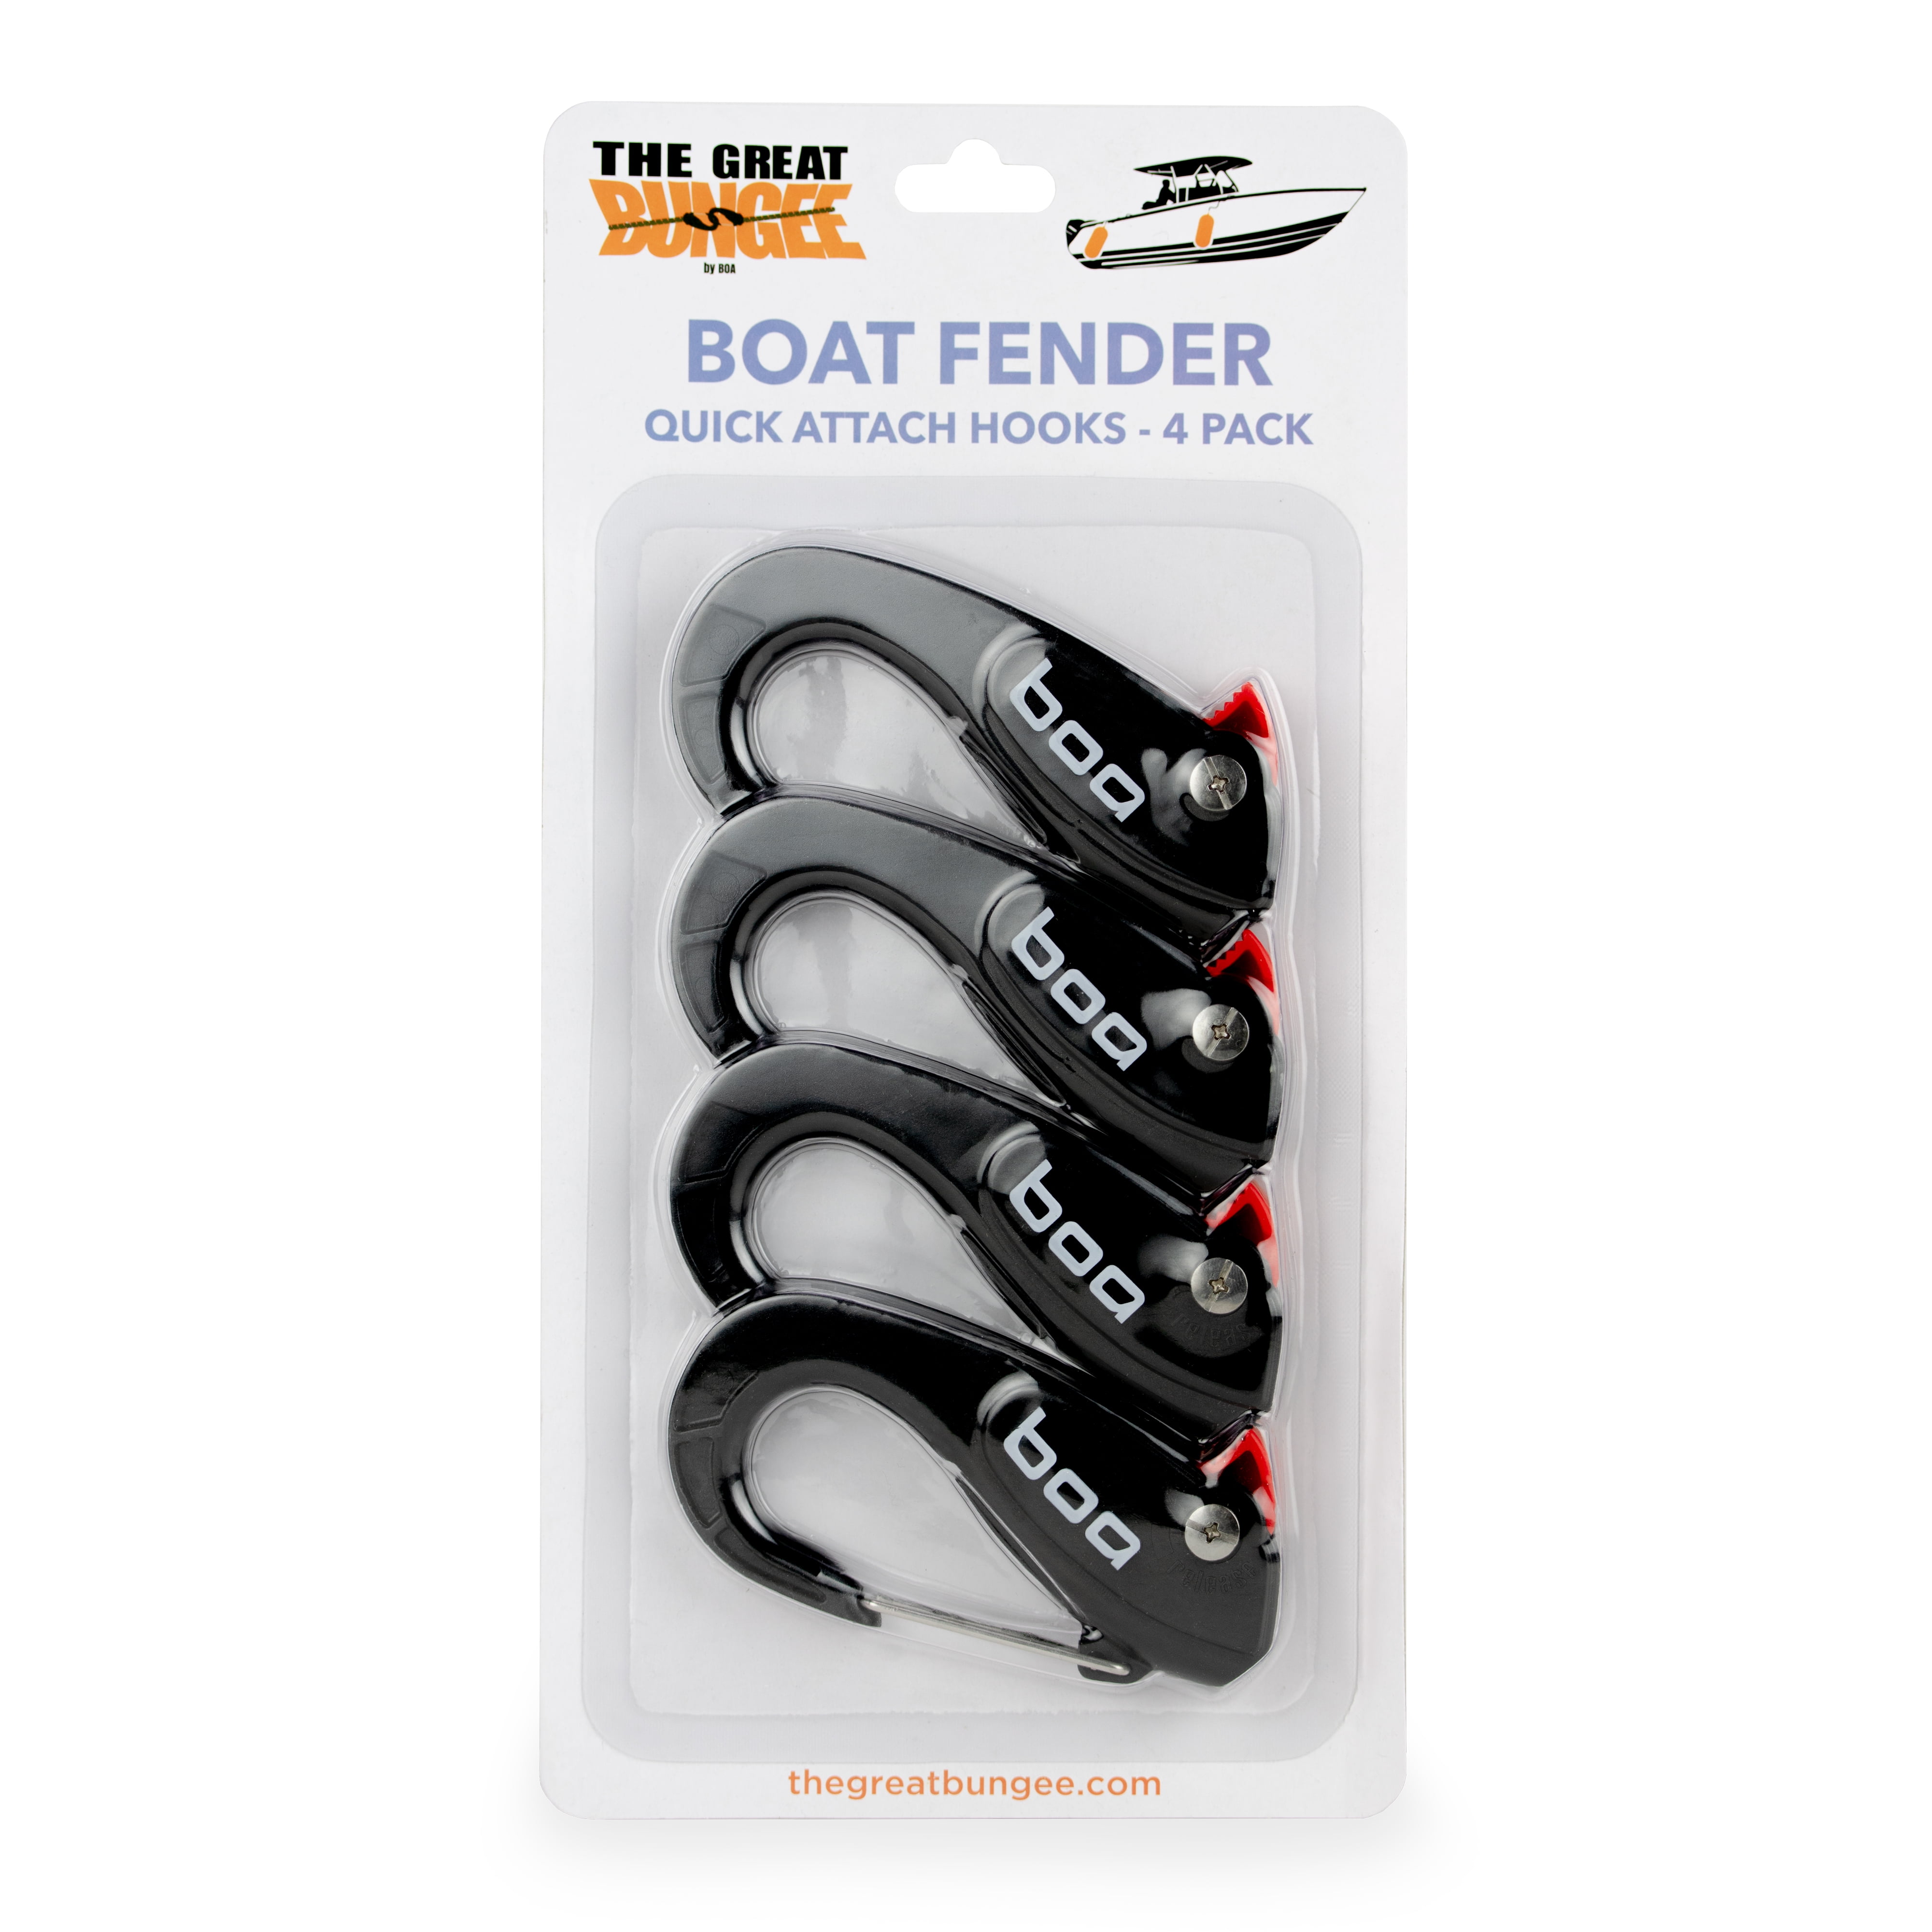 The Great Bungee Adjustable Boat Fender Clips, Quick Attach Hooks, 4 Pack